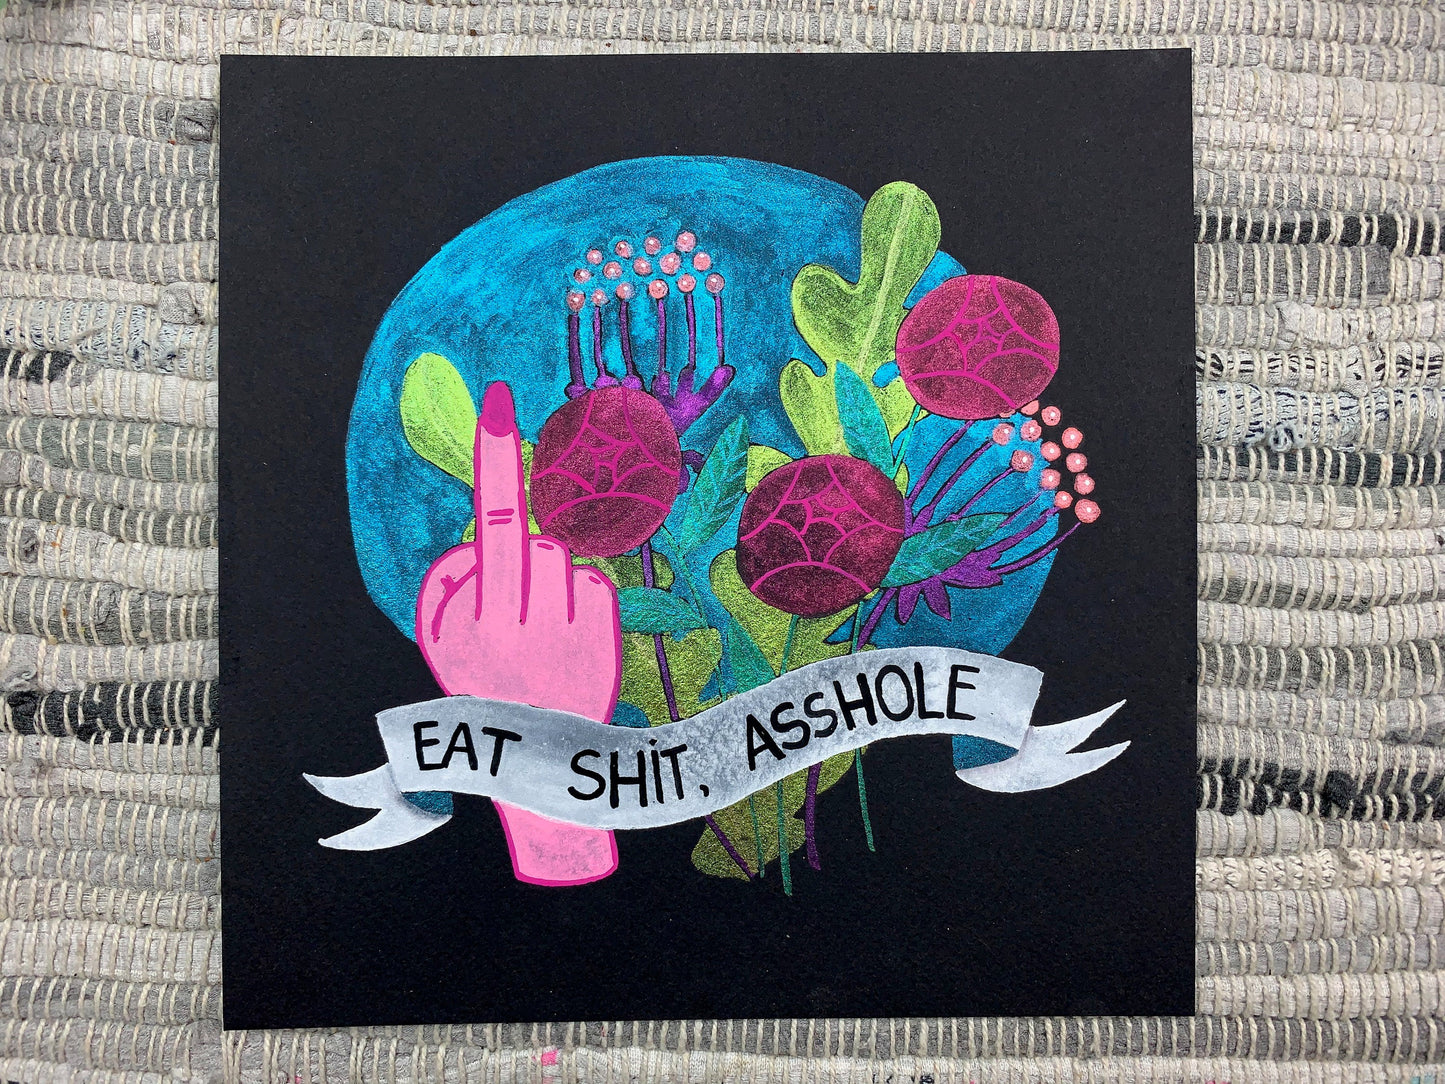 A painting of a hand "flipping the bird" with a bouquet of color shifting flowers behind it and a banner that says "Eat shit, asshole" in front.